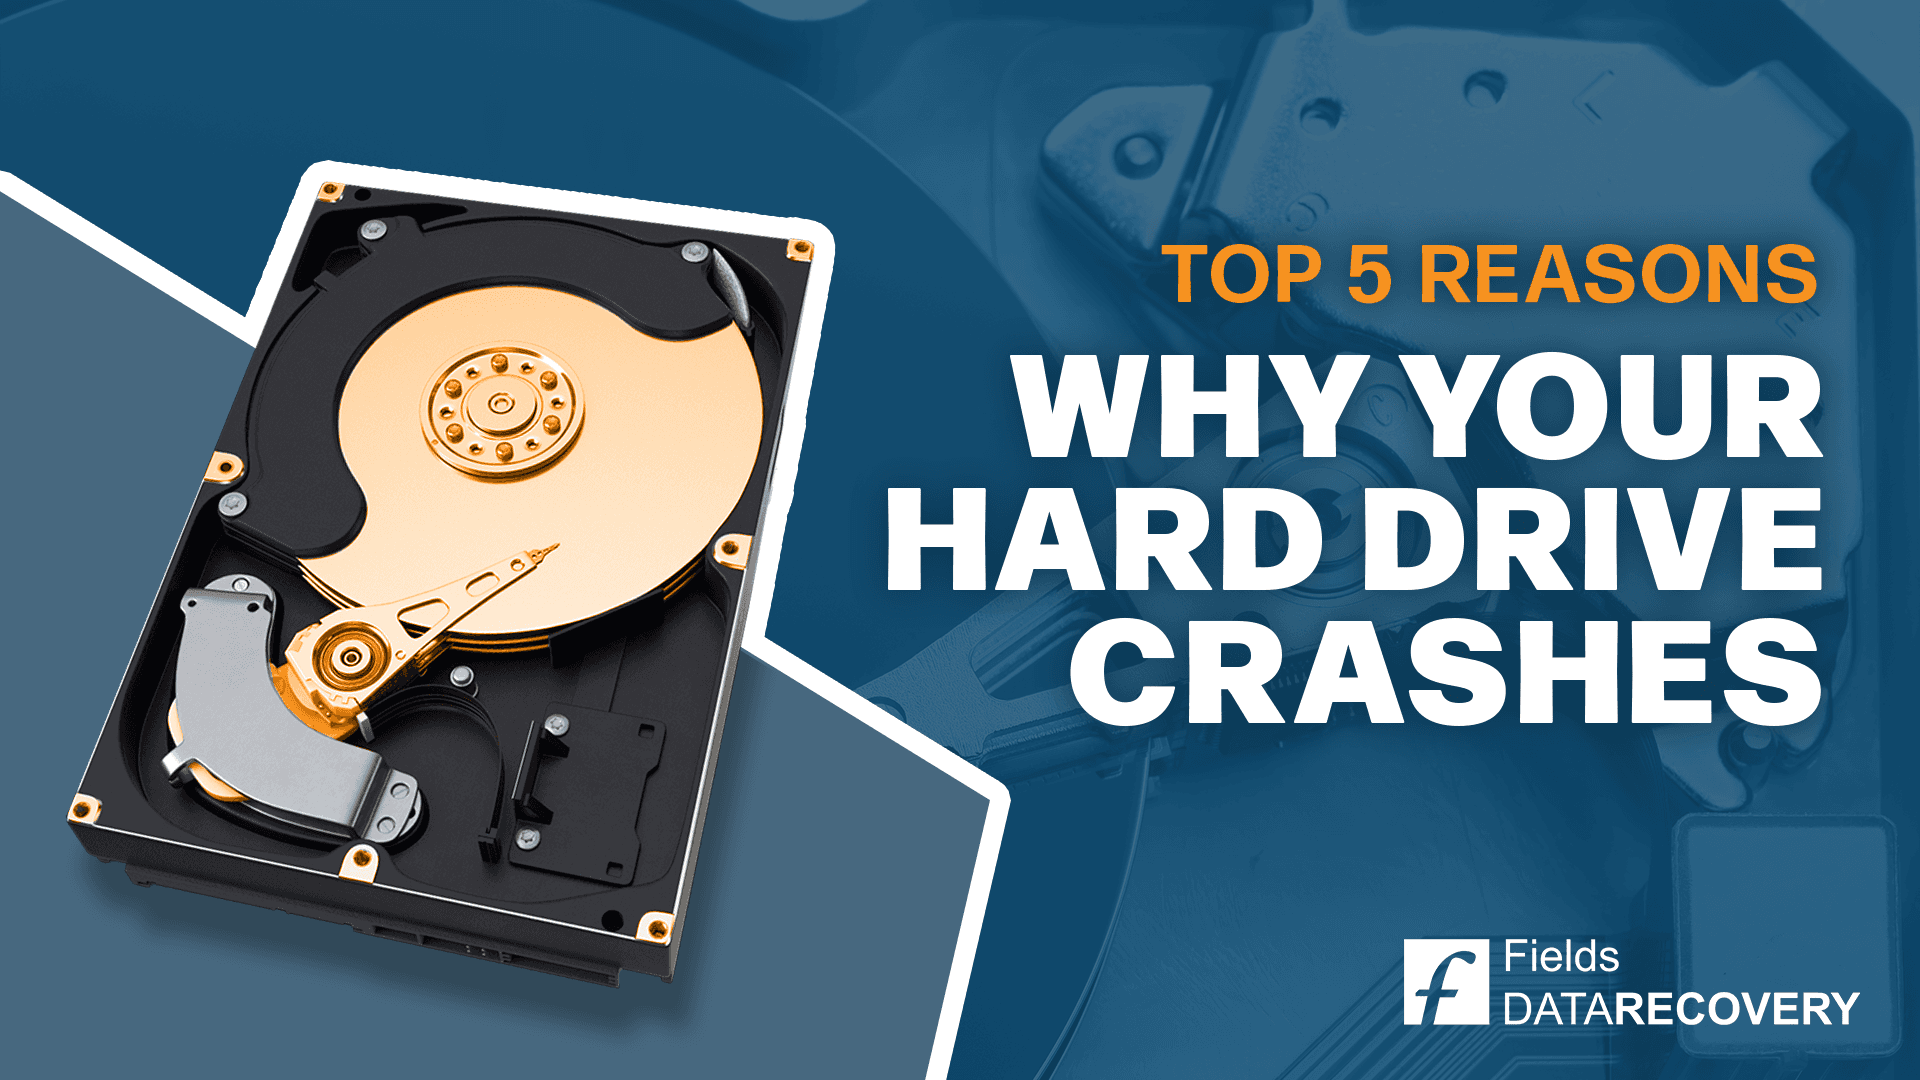 The Top 5 Reasons Why Your Hard Drive Crashes